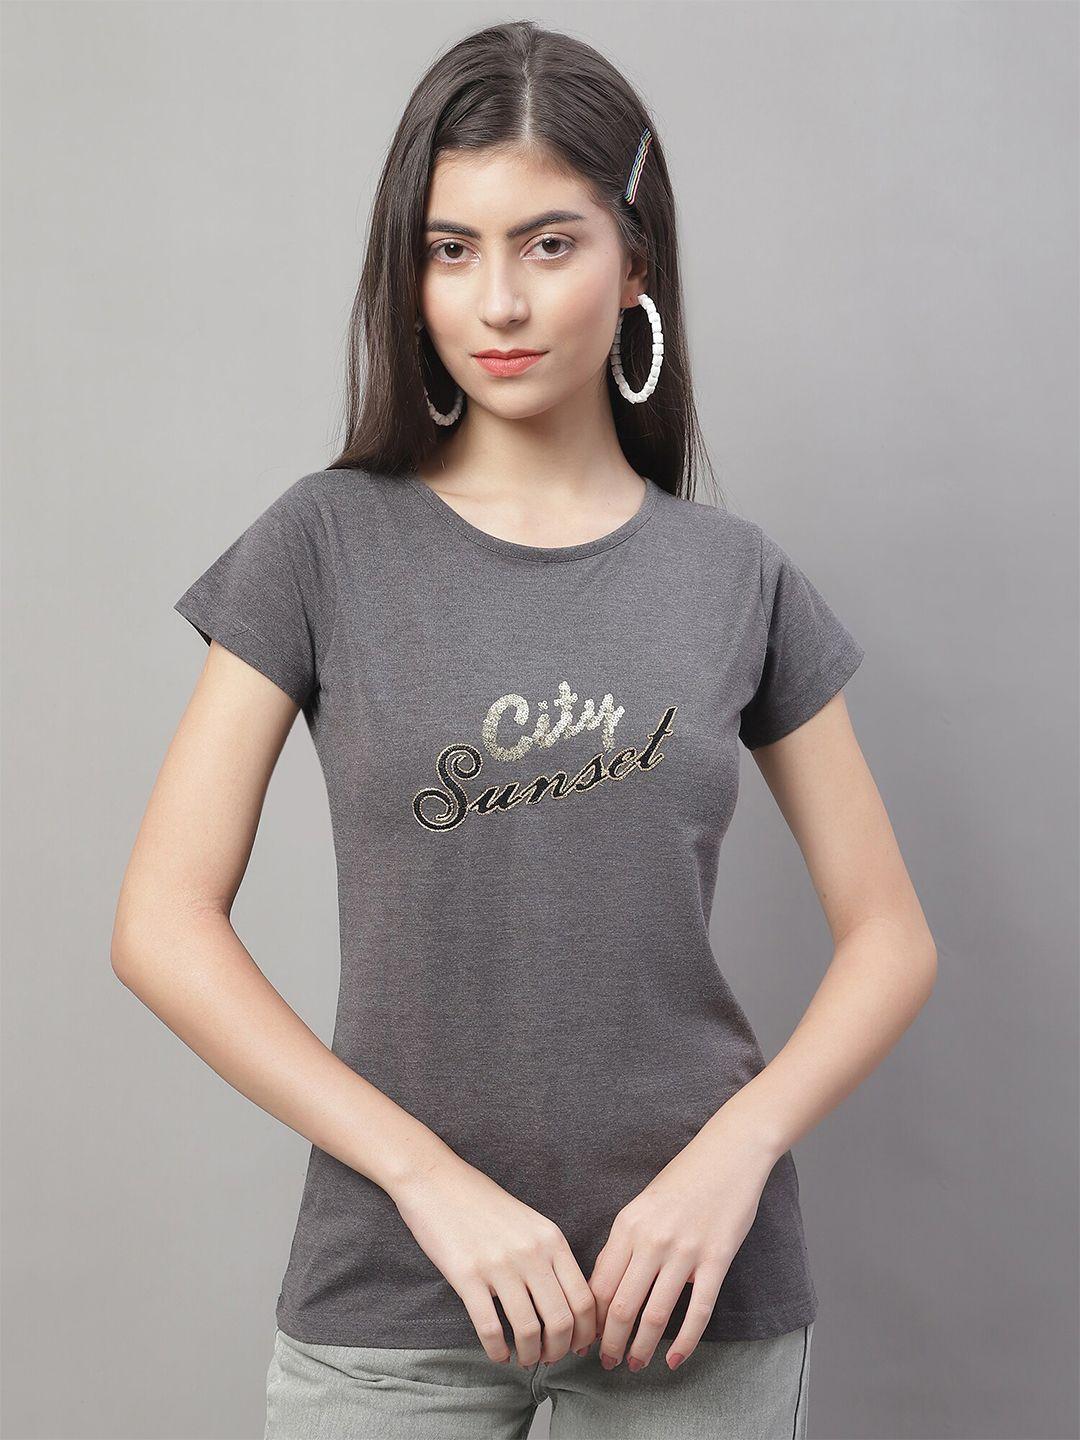 crozo by cantabil embellished typography printed t-shirt